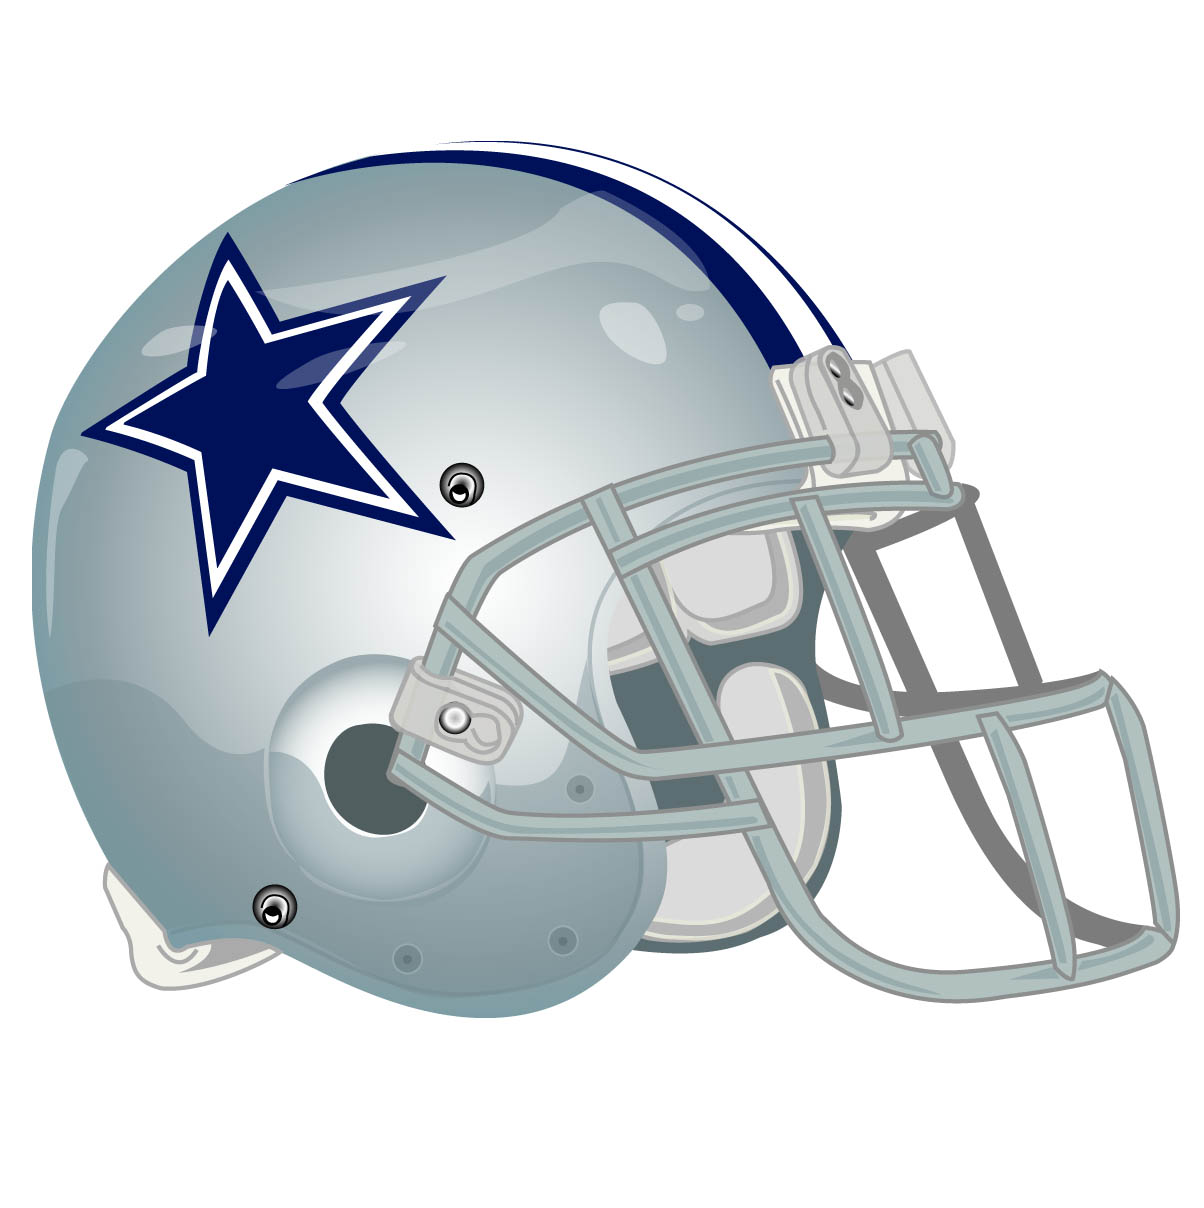 13 Dallas Cowboys Stars Logo Free Cliparts That You Can Download To